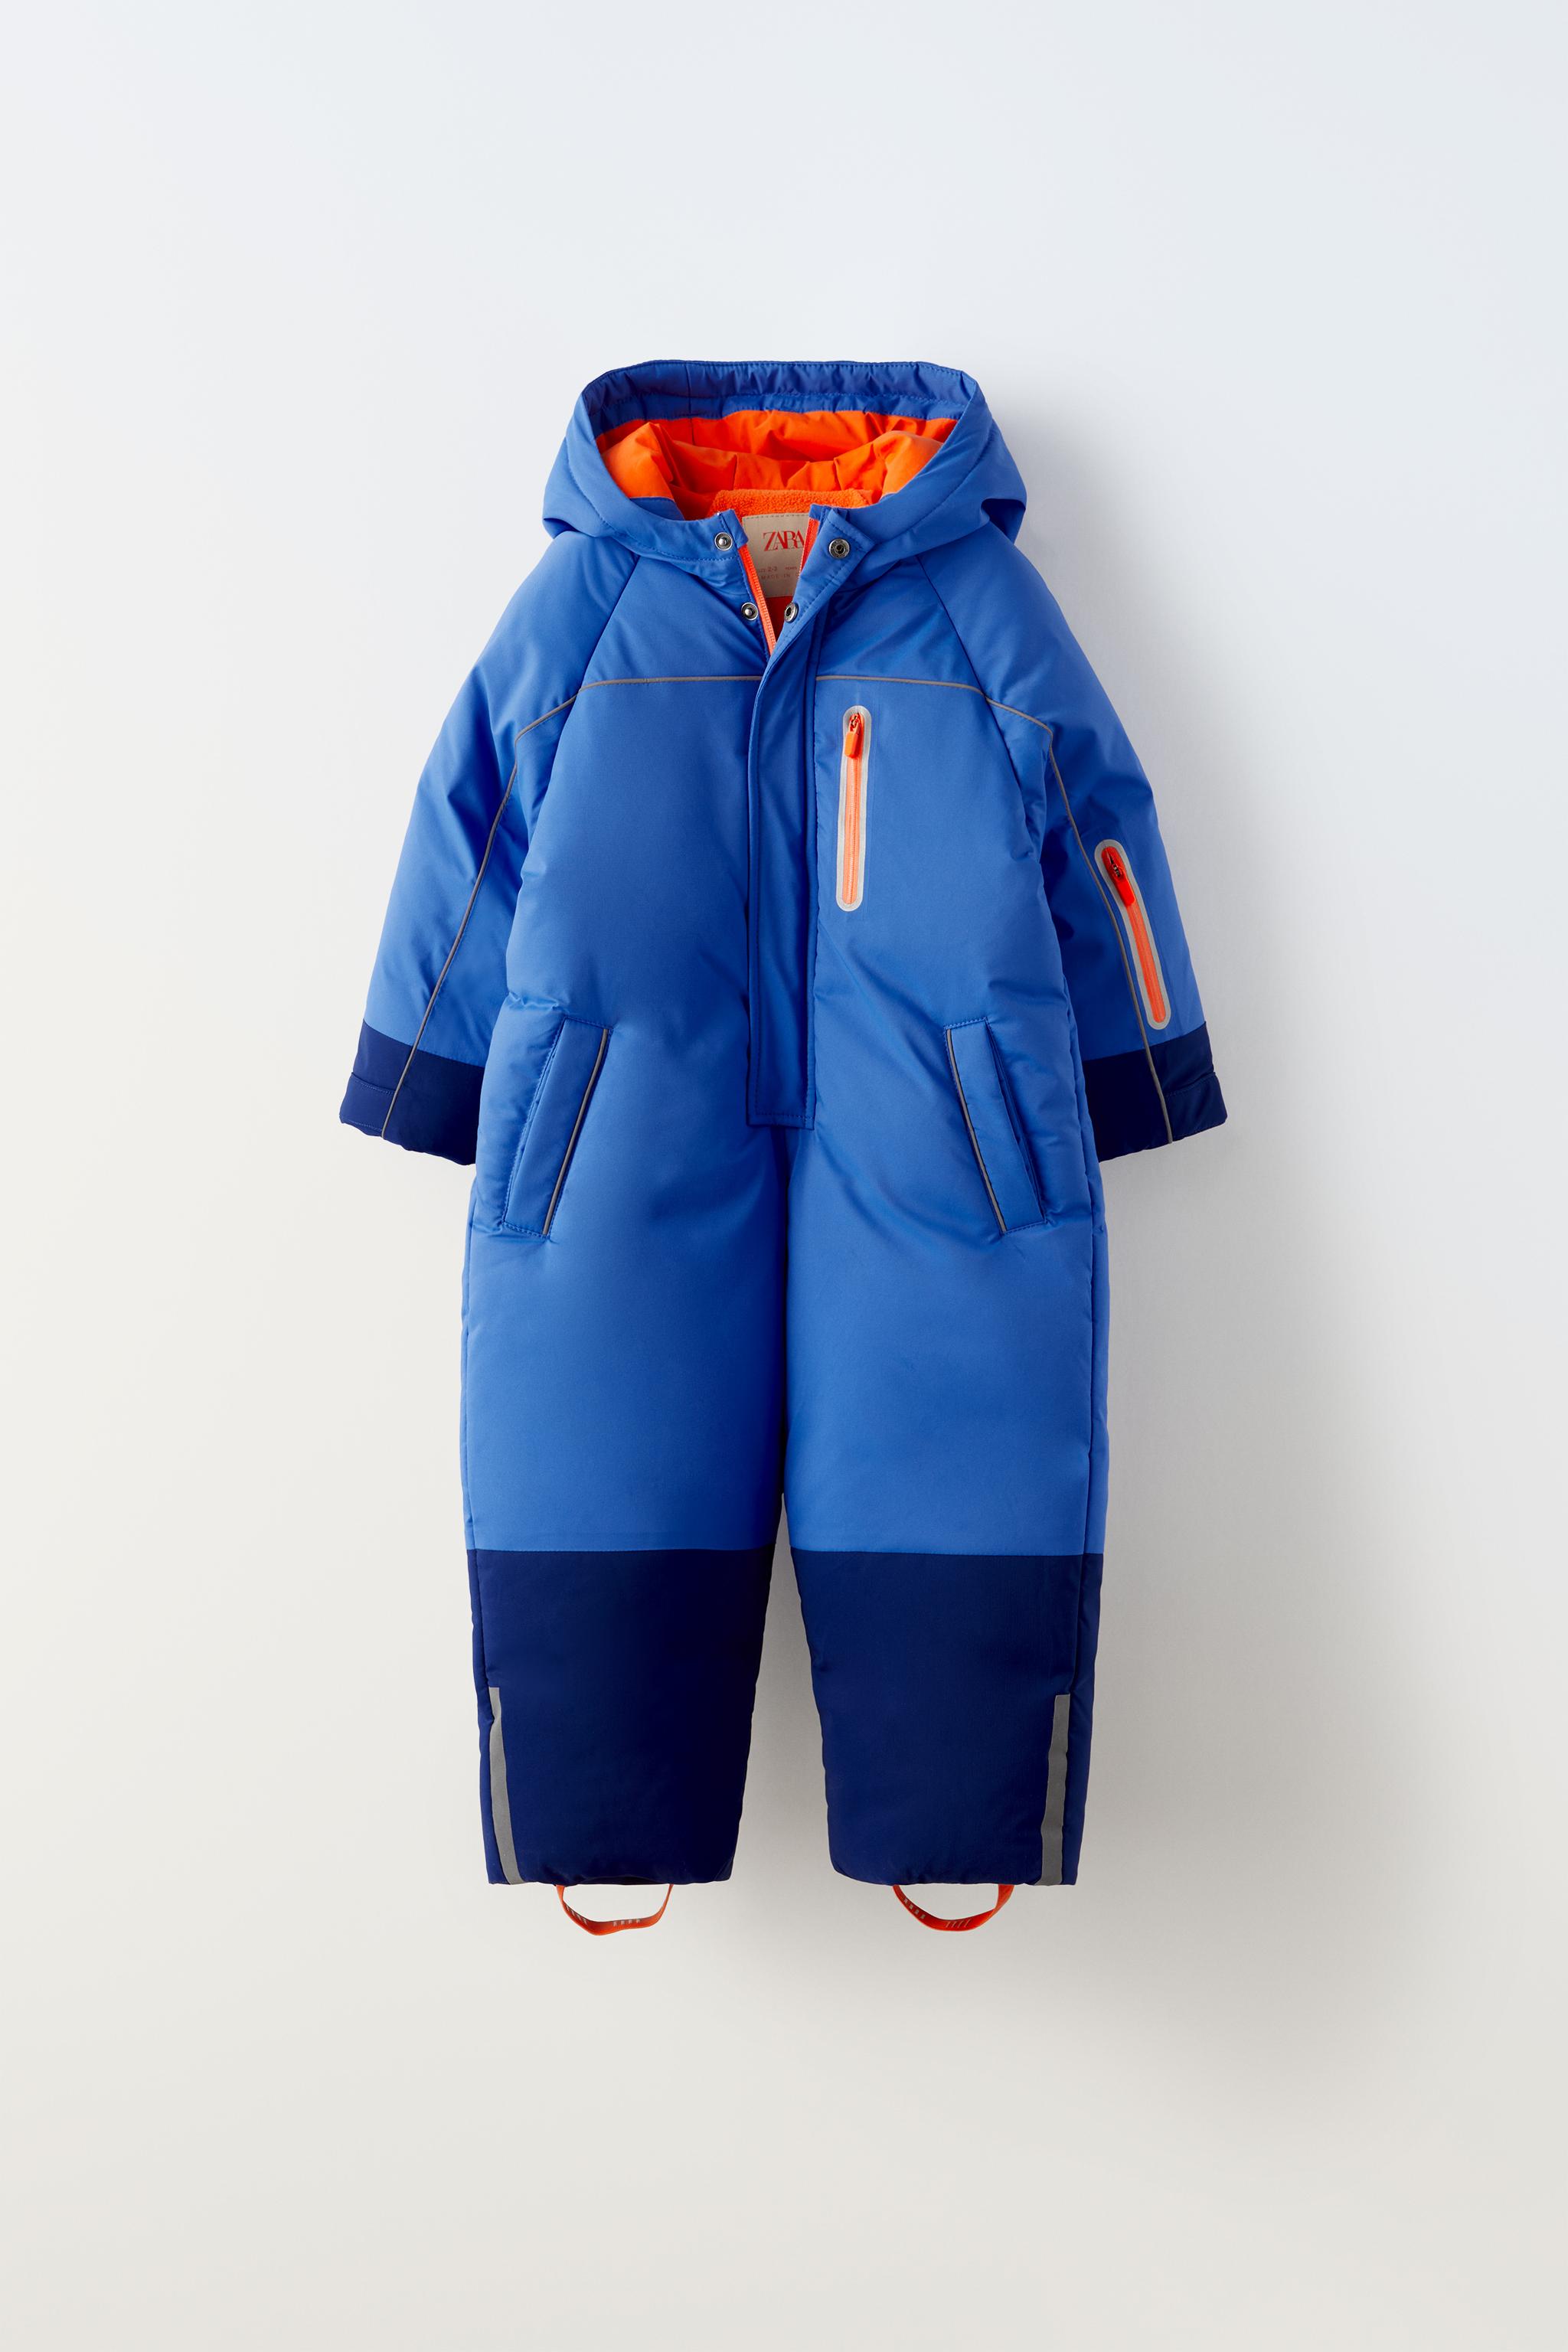 WATER REPELLENT AND WIND RESISTANT SNOW SUIT SKI 